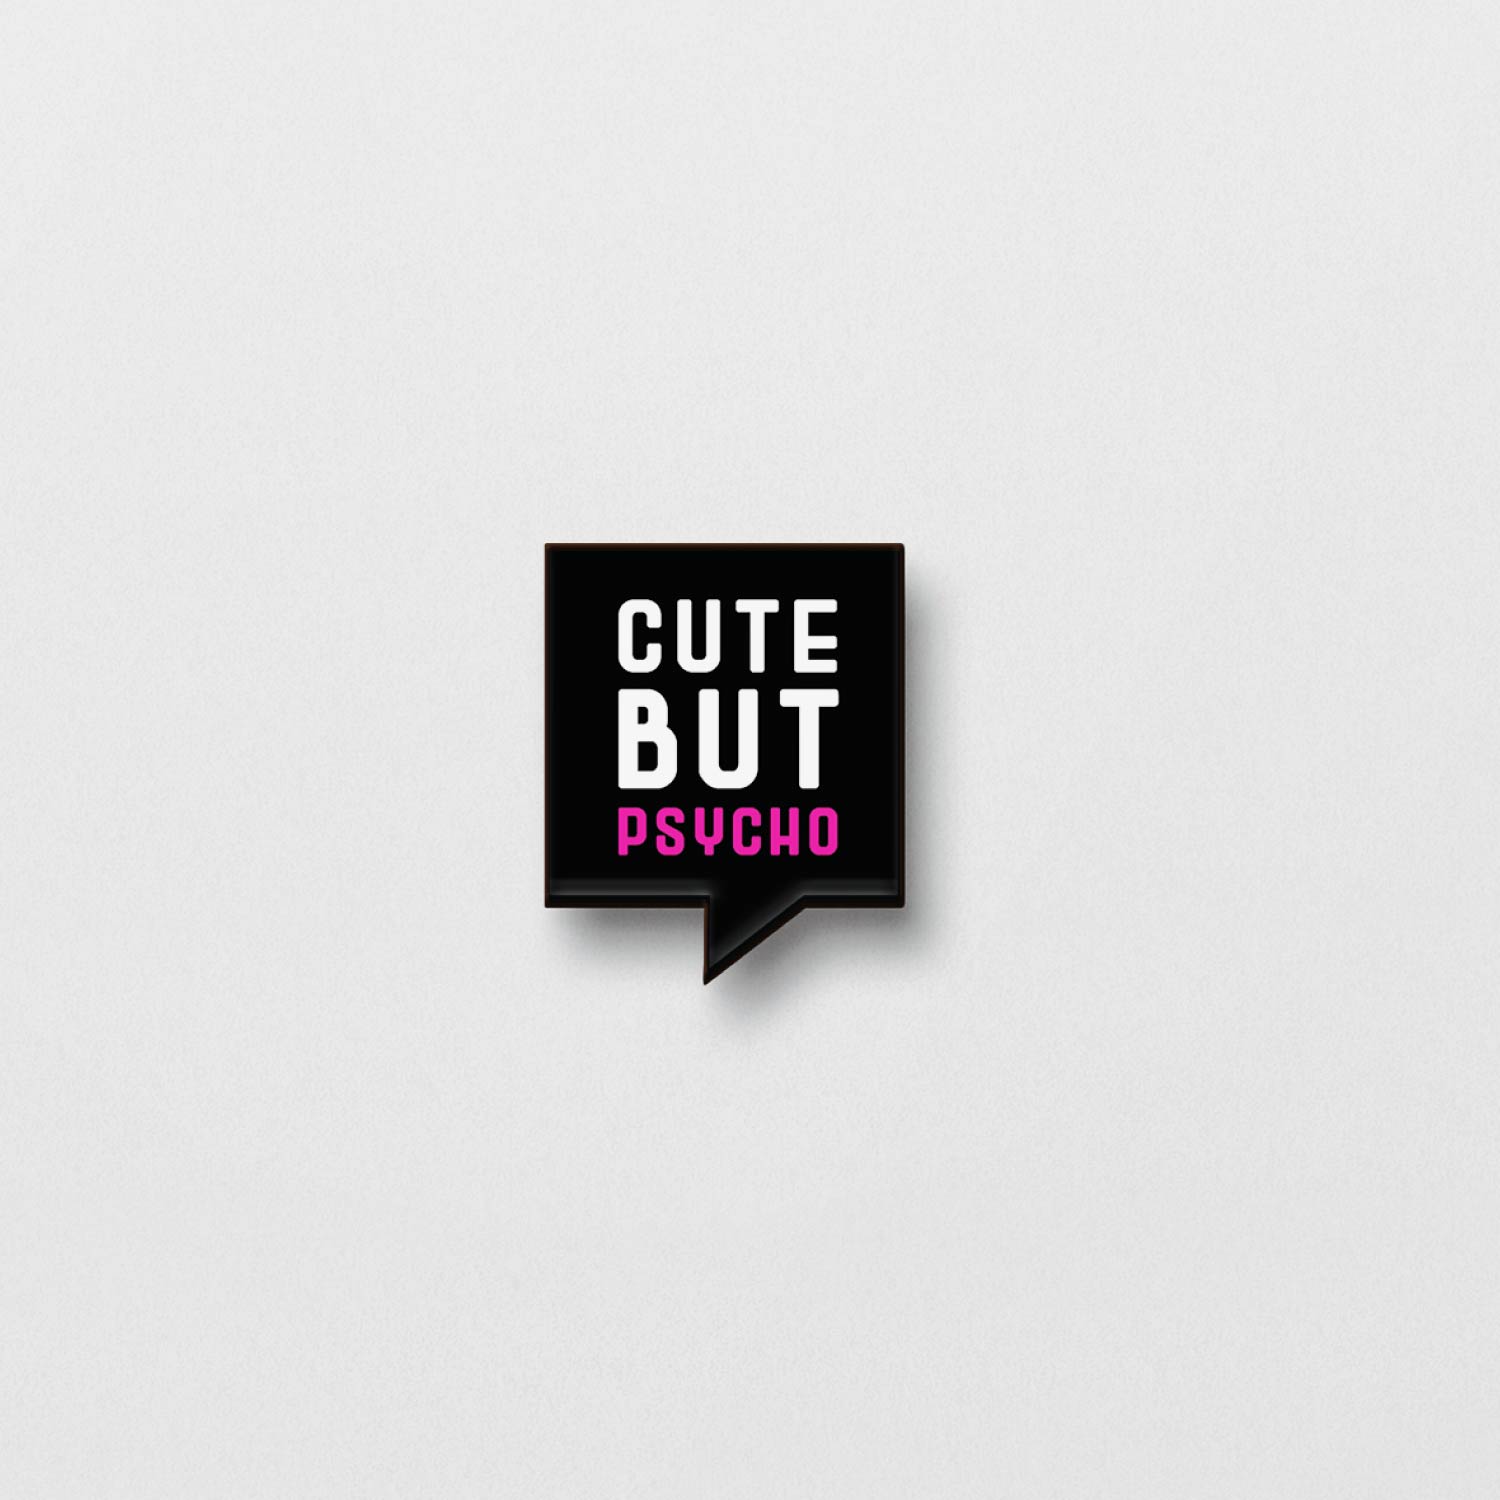 The Cute But Psycho Pin